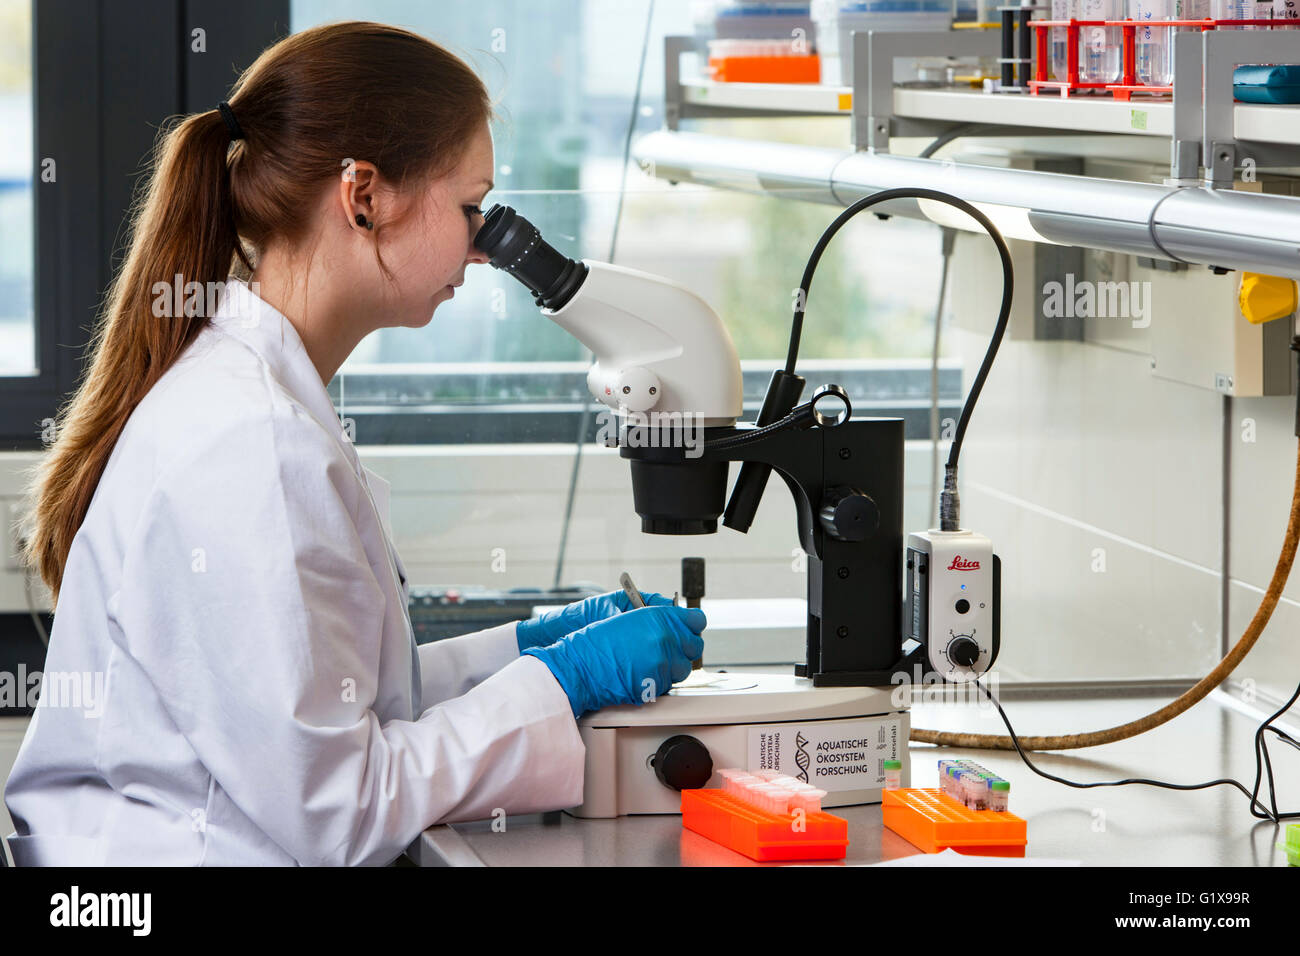 Scientist Working At The Microscope Stock Photo Alamy